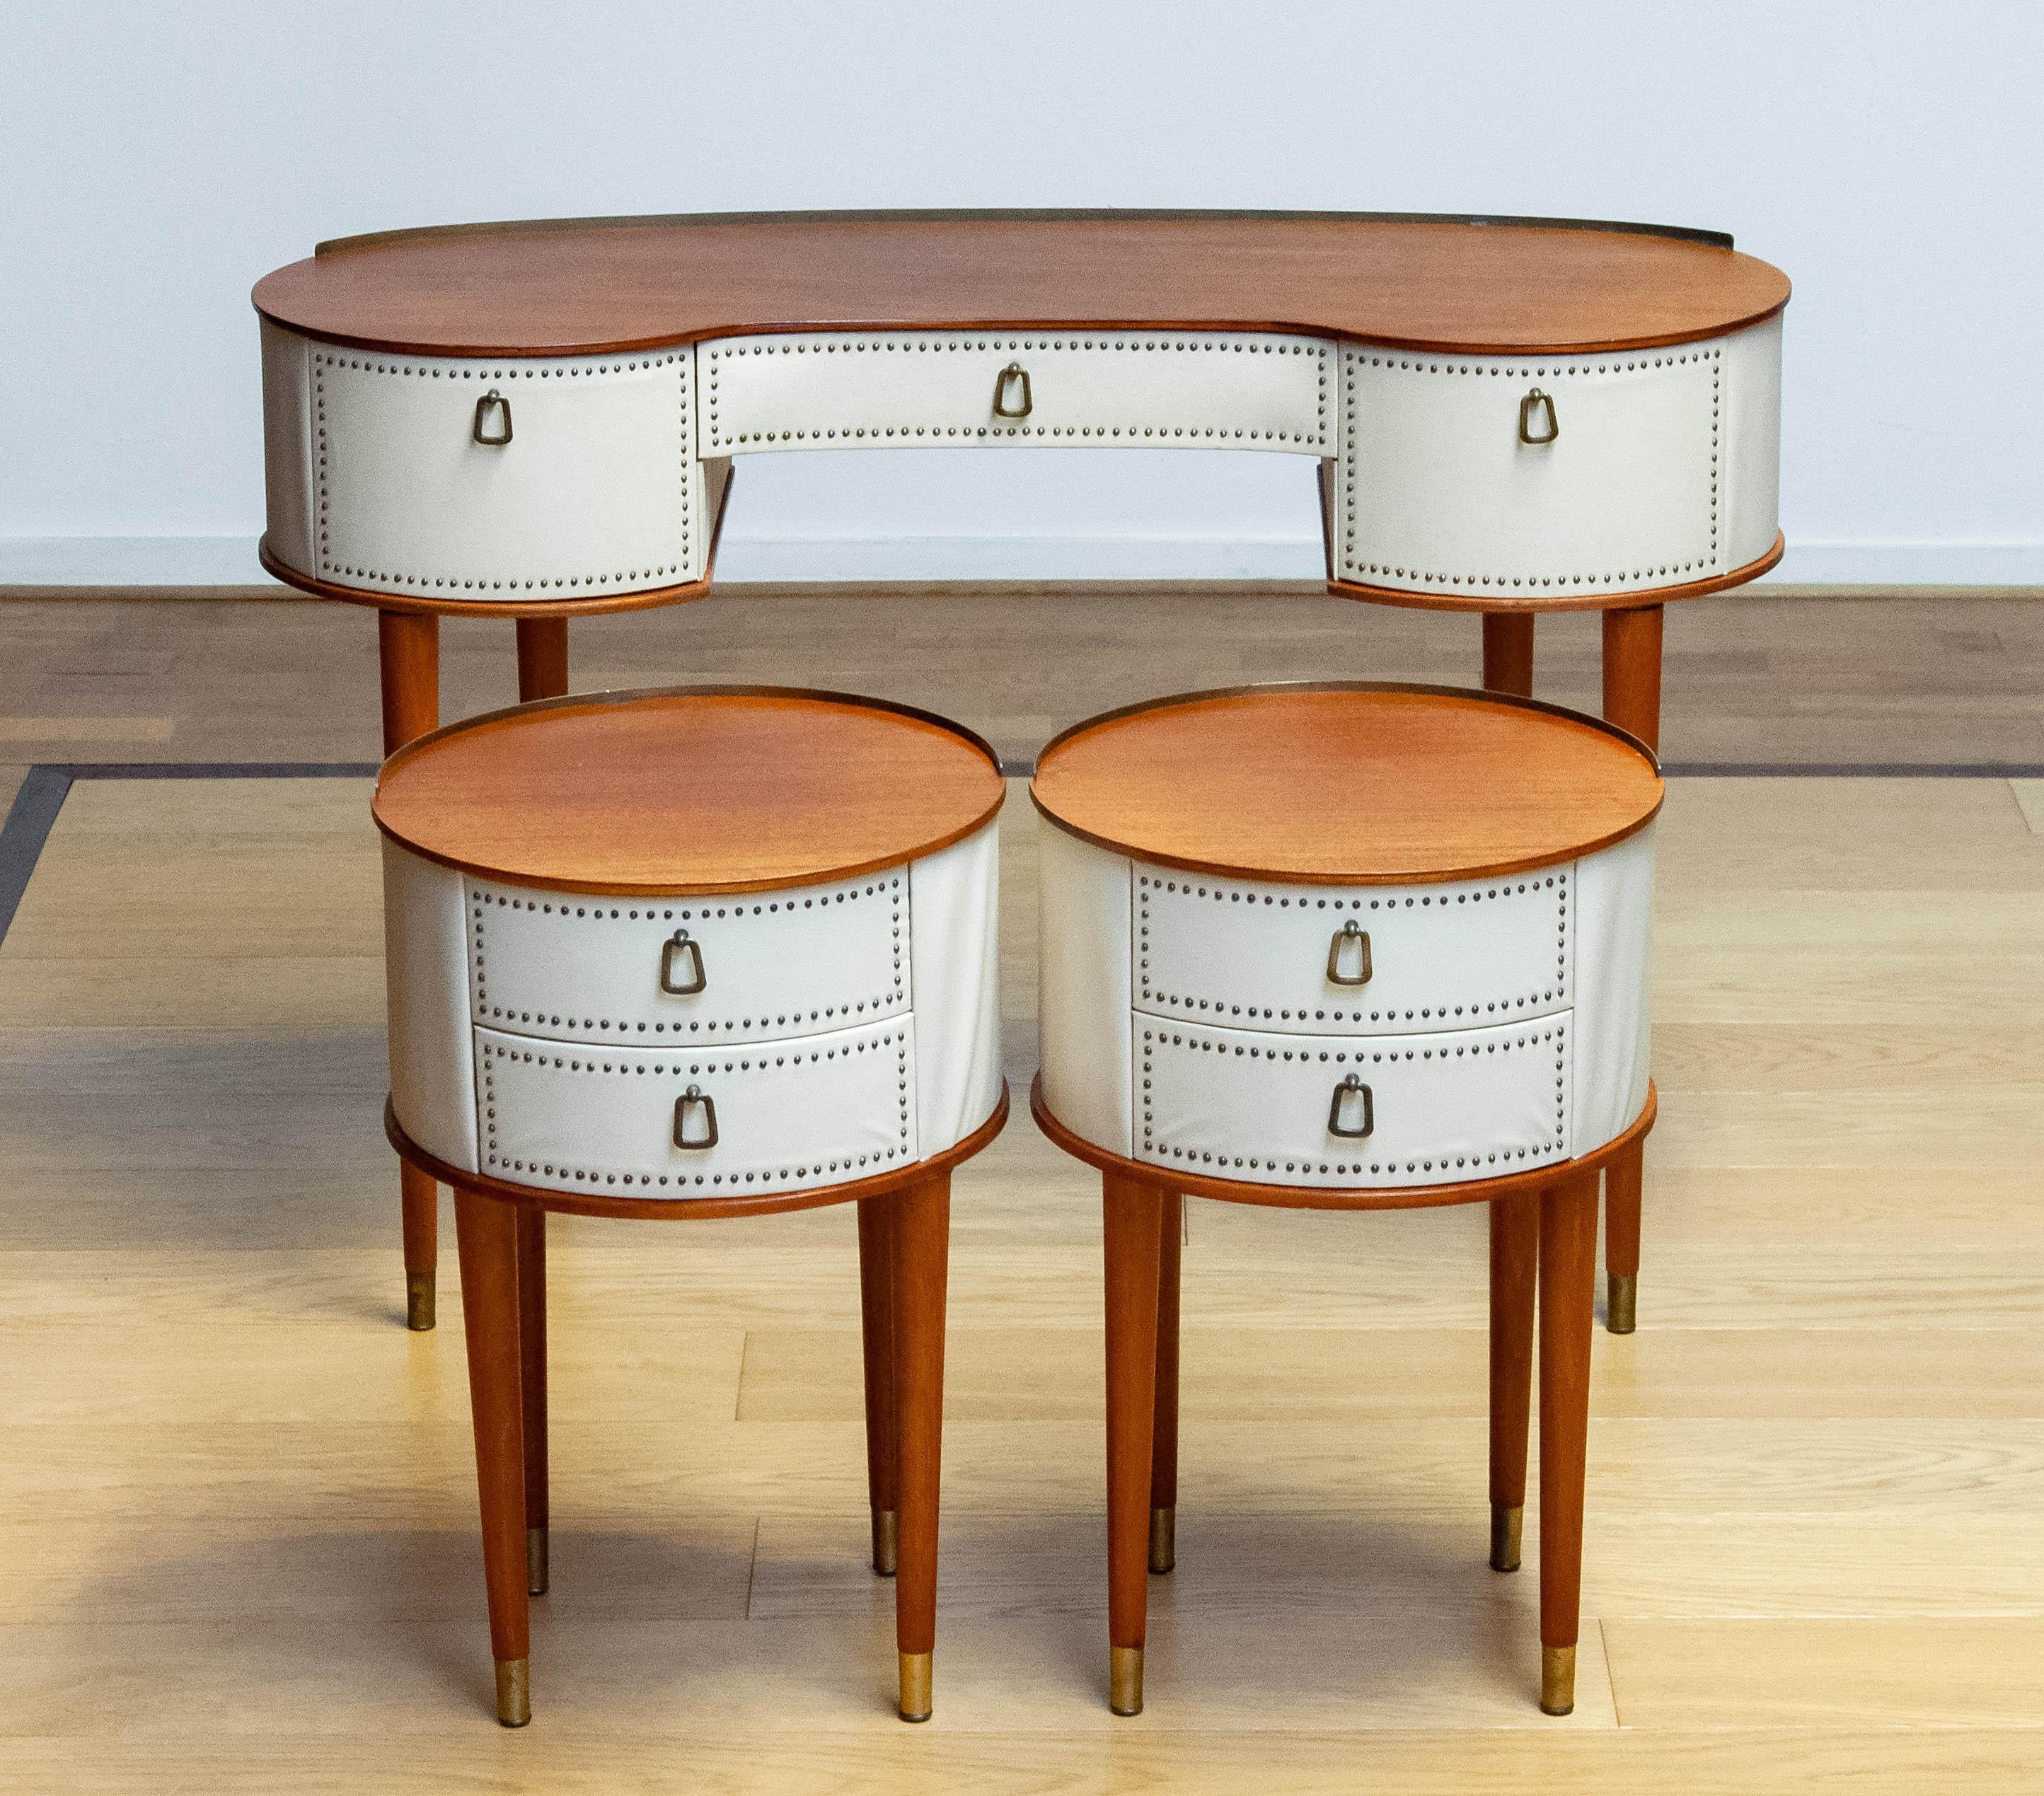 Beautiful and absolutely rare matching set of a pair night stands / bedside tables and a Vanity / dressing table all three designed by Halvdan Pettersson for Tibro in Sweden from the 1950s.
Covered with beige faux leather. Both nightstands / bedside